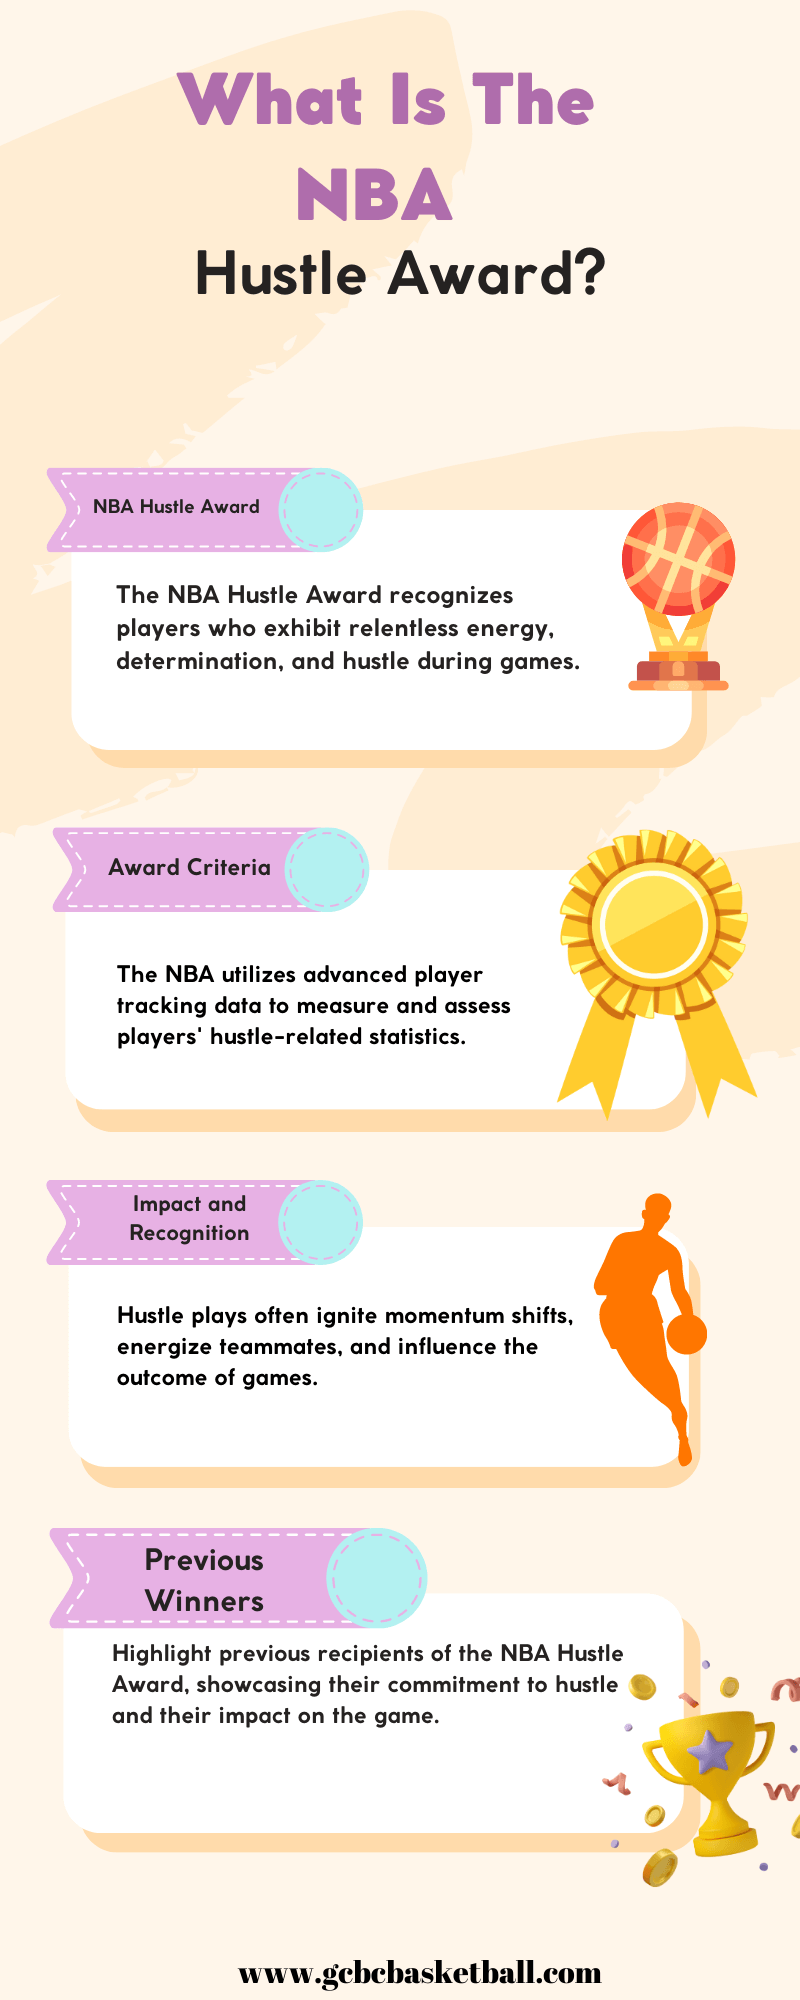 What Is The Highest Award In Basketball?